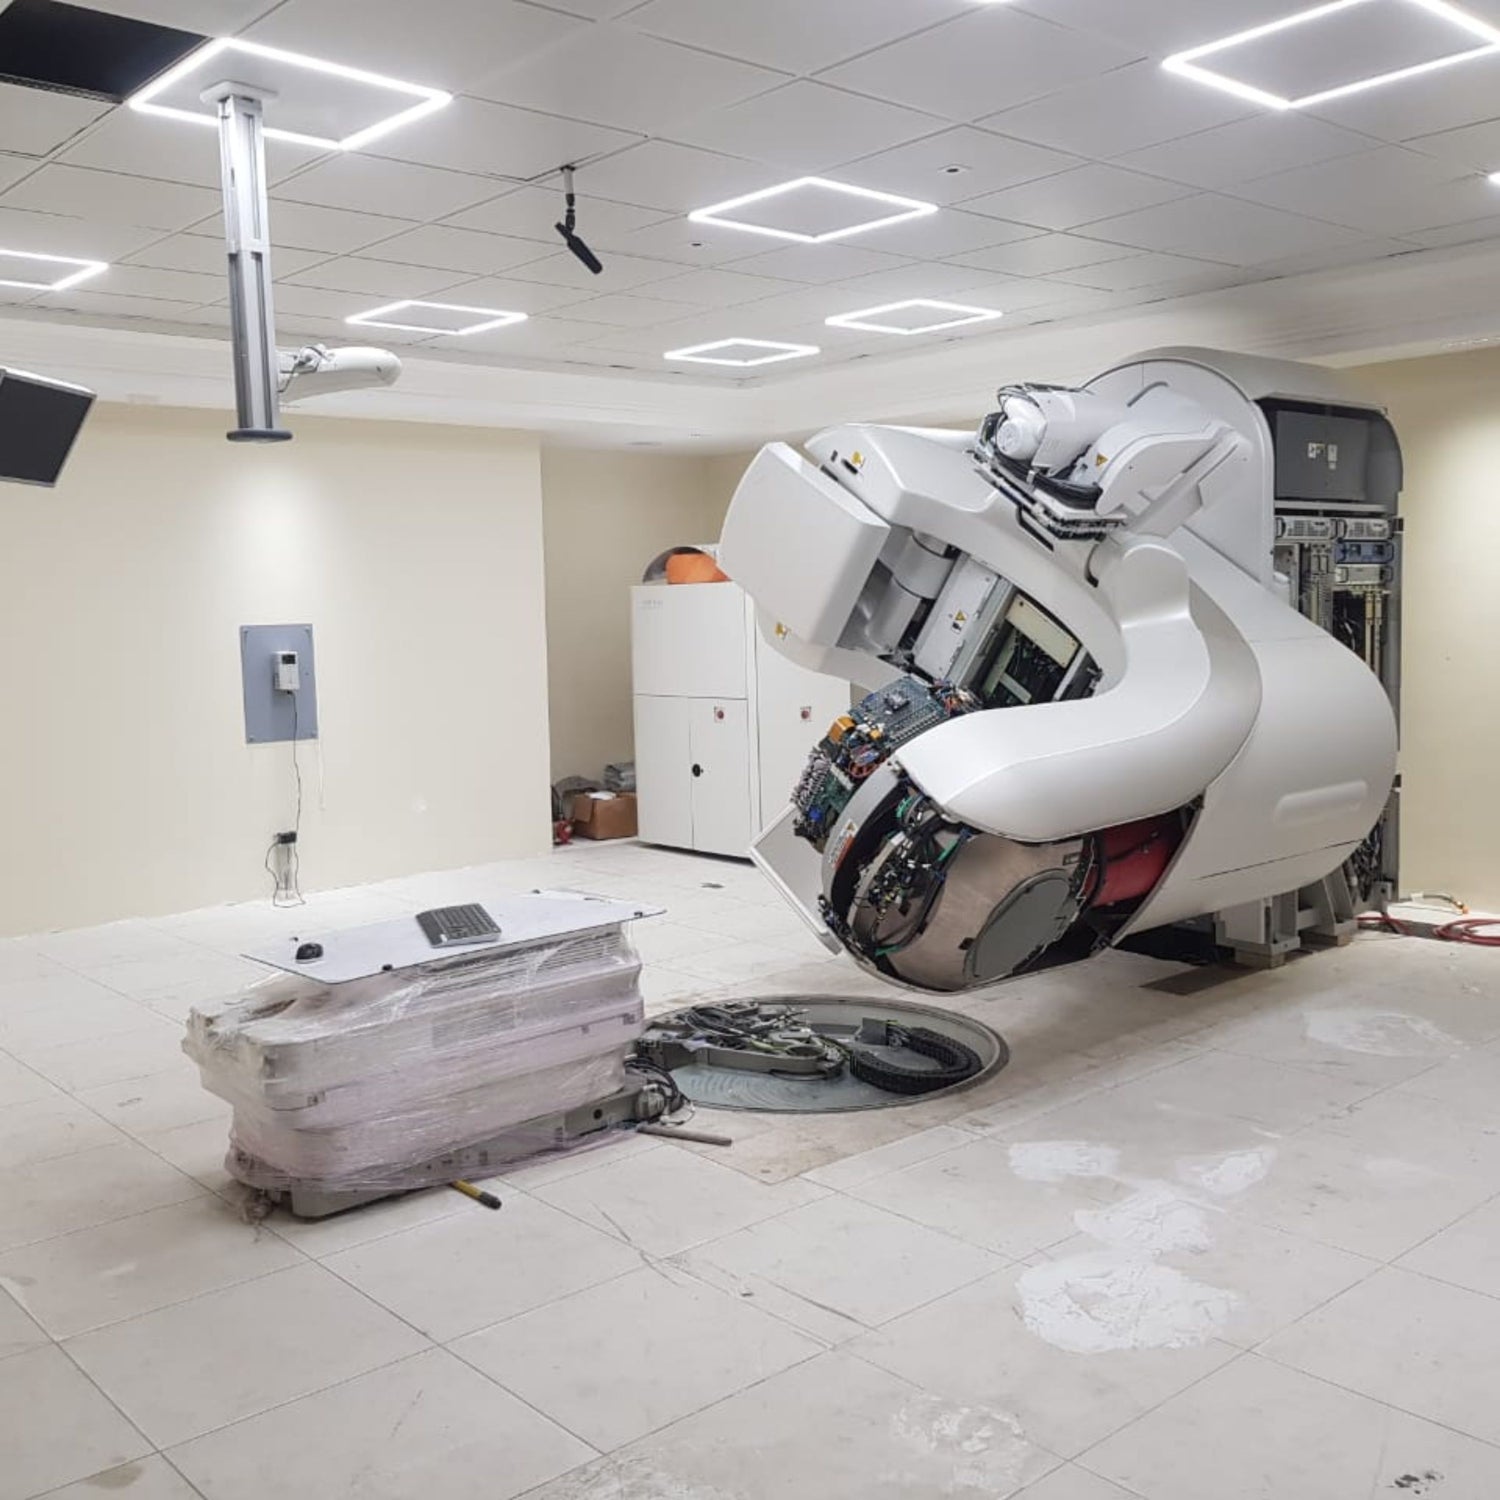 Air conditioning in linac room